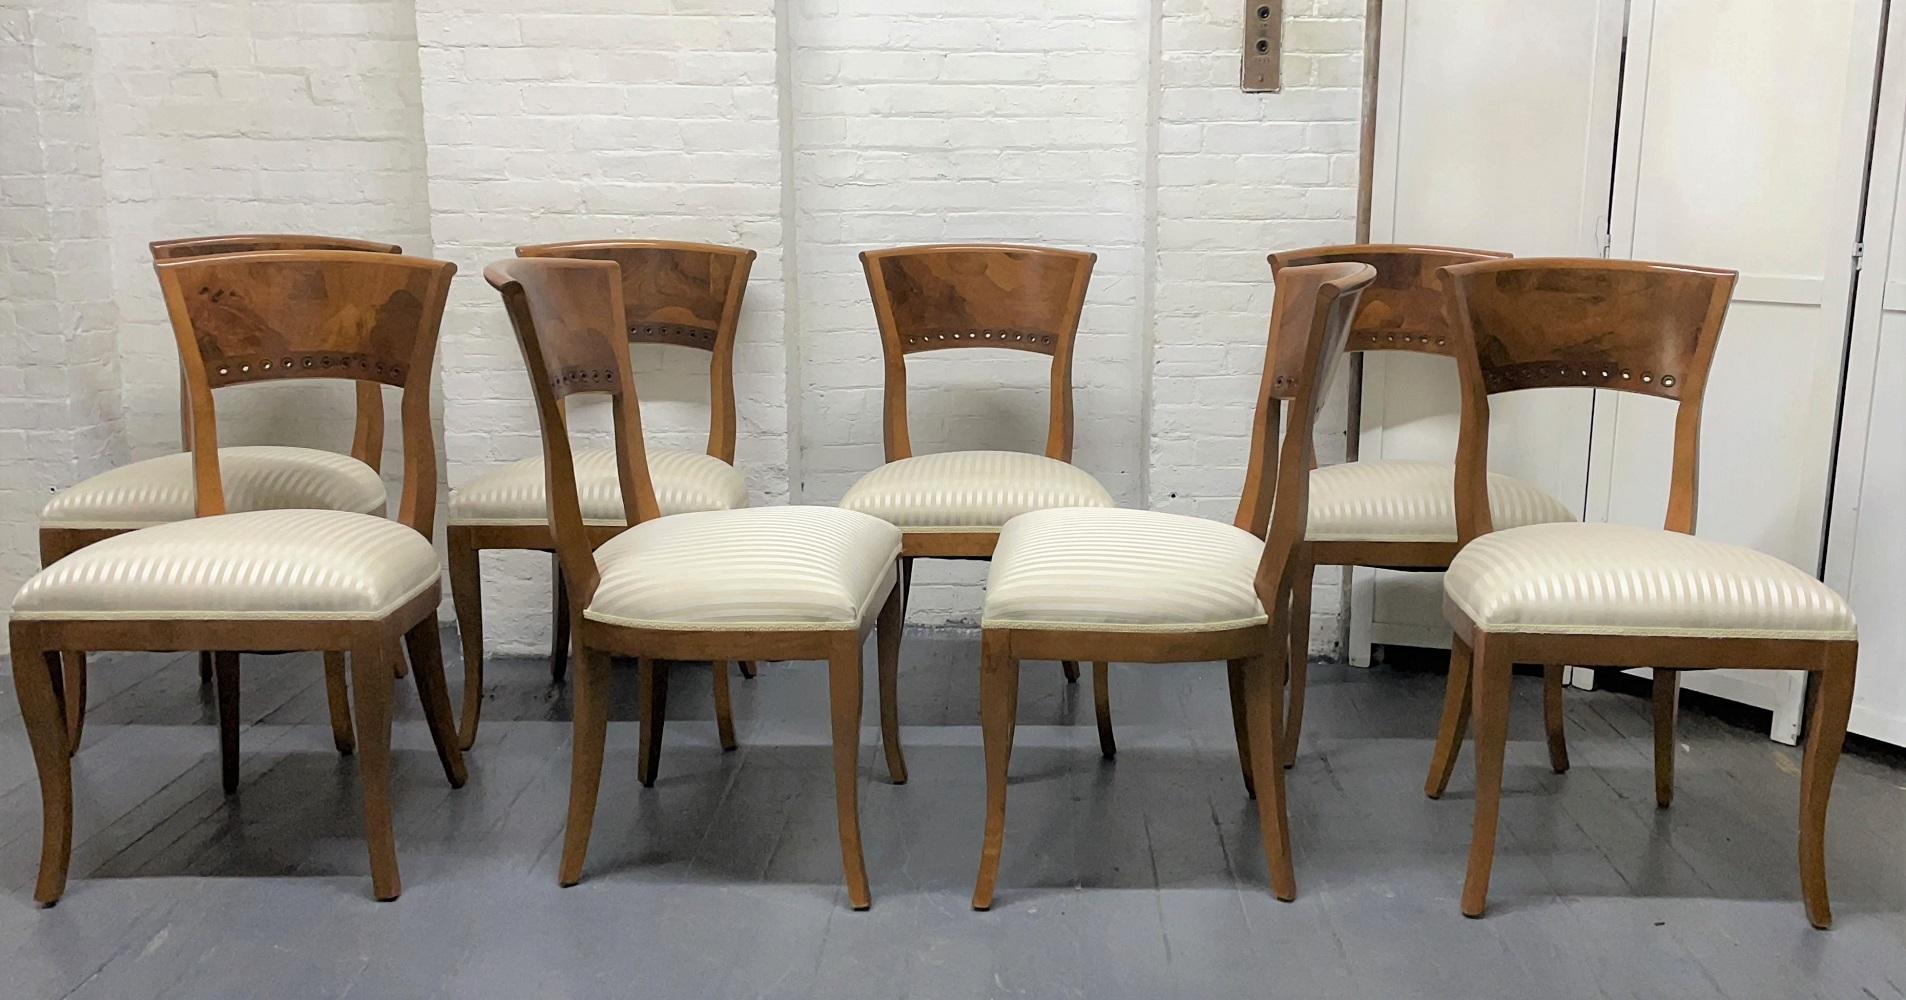 Set of 8 Biedermeier style dining chairs. The chairs are cherry and have walnut burlwood backs.